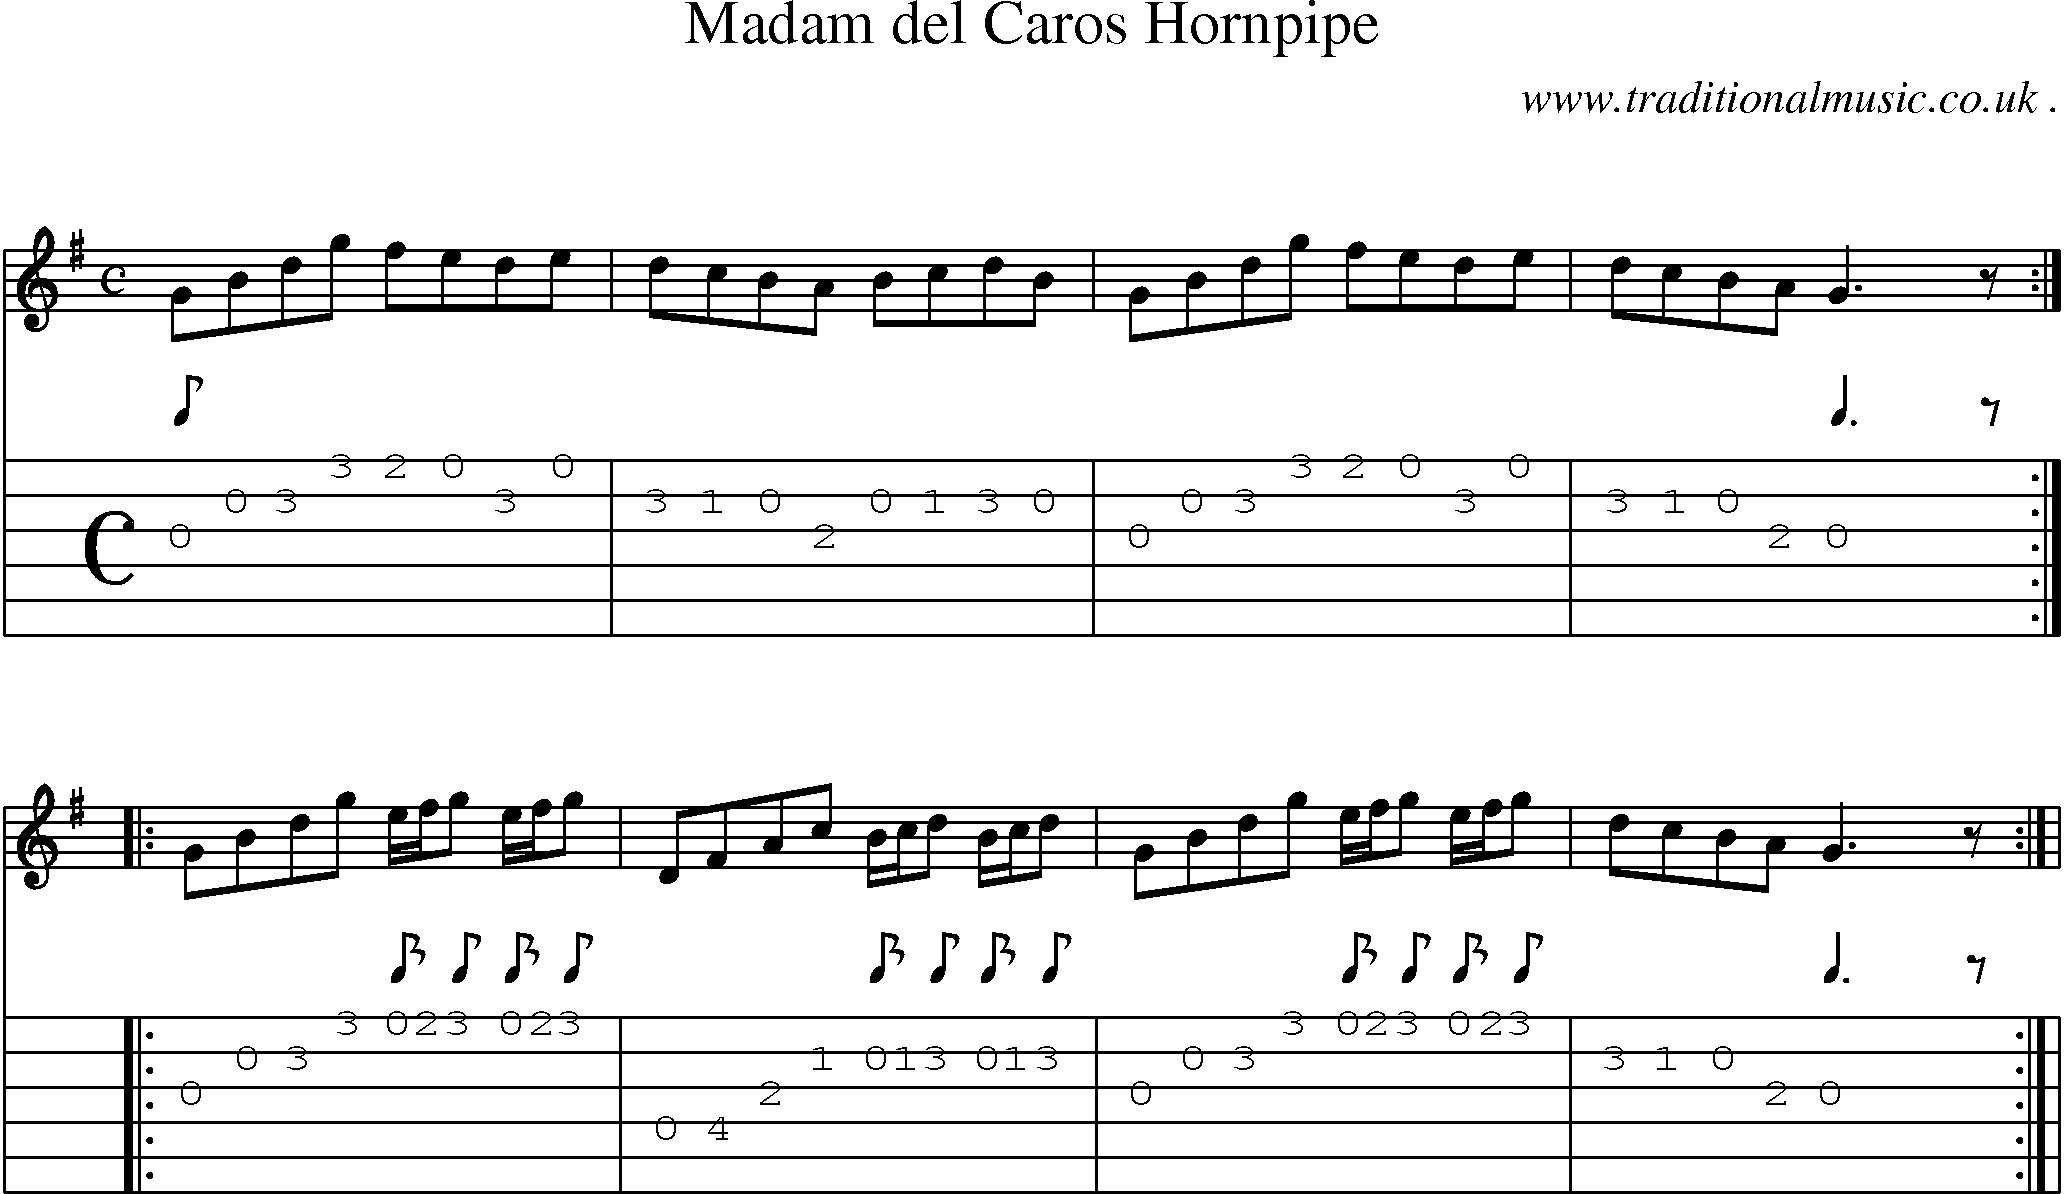 Sheet-Music and Guitar Tabs for Madam Del Caros Hornpipe